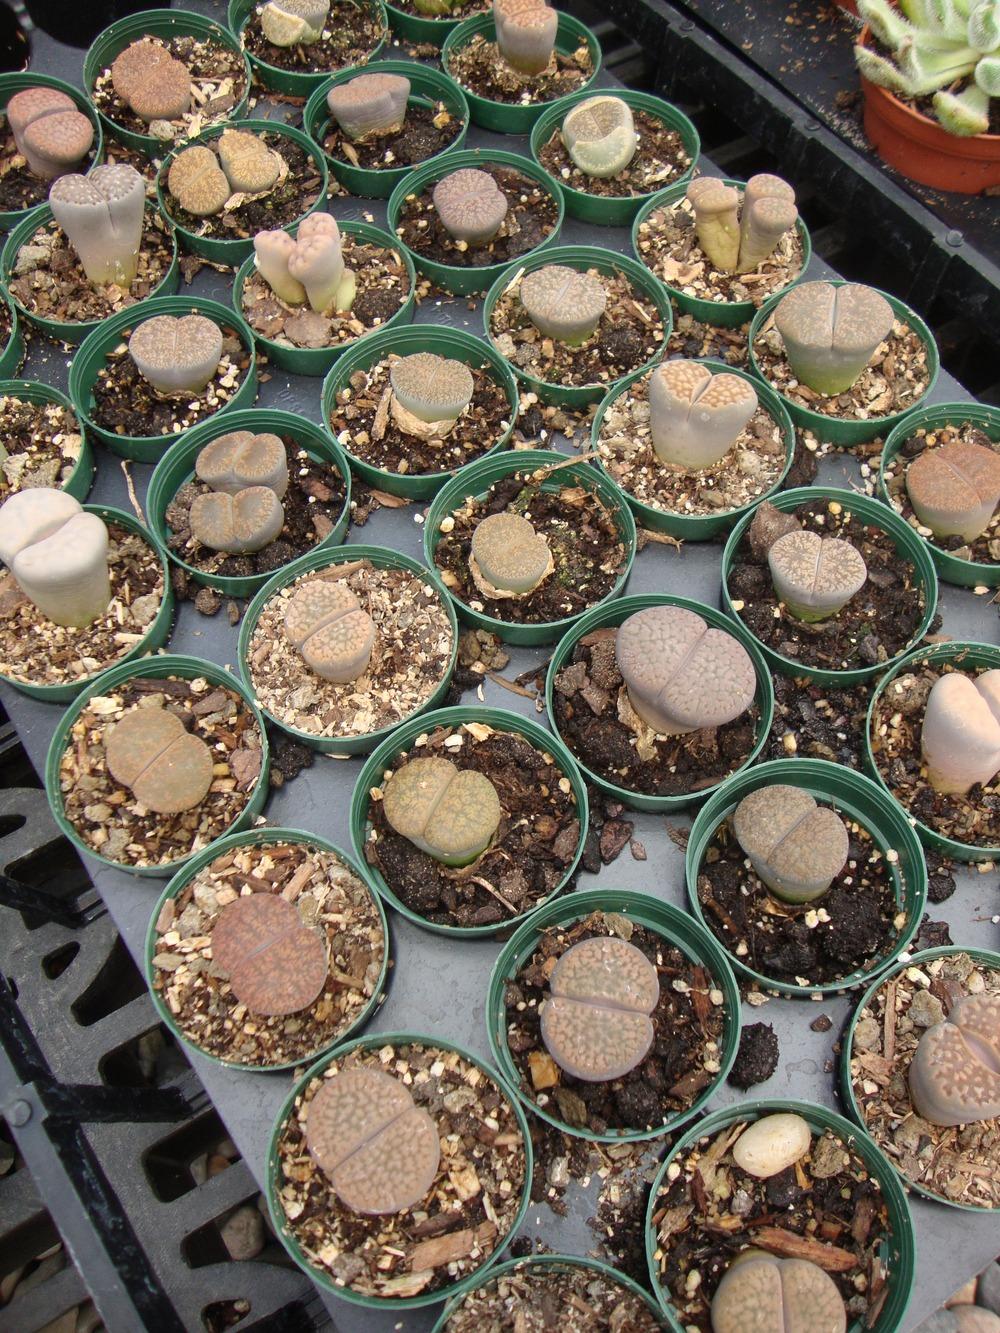 Photo of Living Stones (Lithops) uploaded by Paul2032